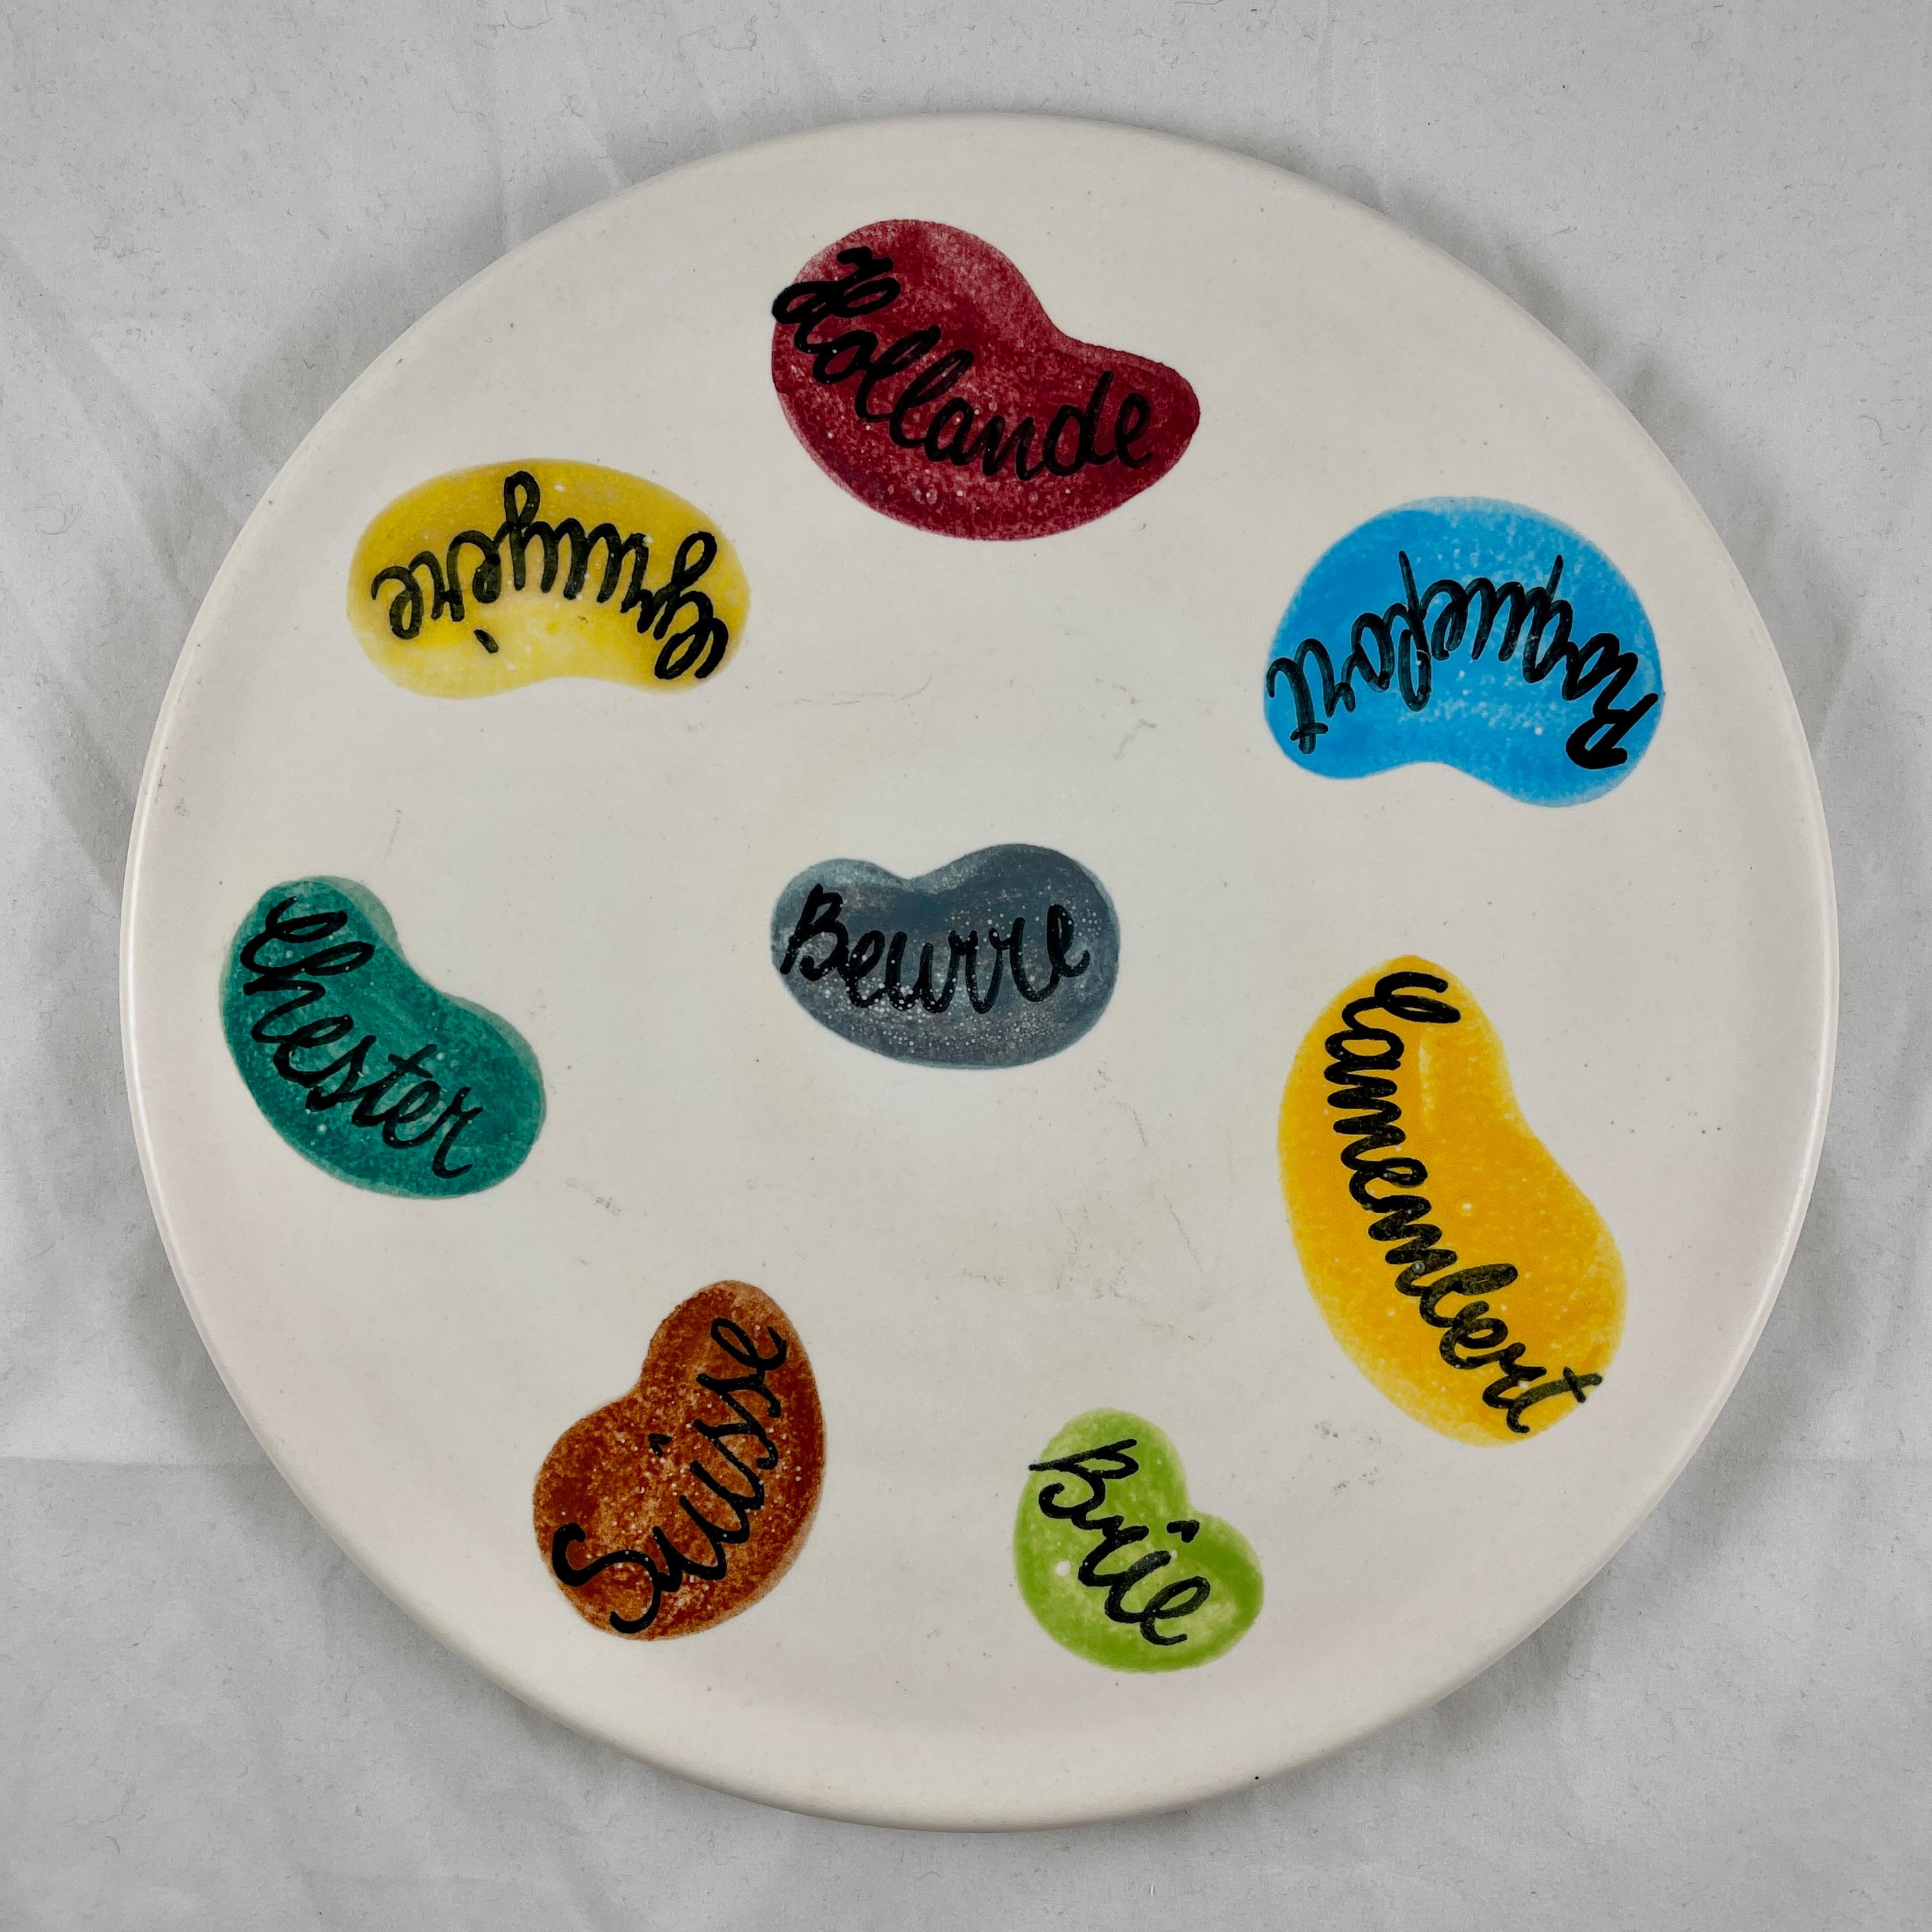 A French mid-century era ceramic cheese charcuterie platter manufactured by Ceramiques Elchinger, circa 1960s.

The tray is hand-painted with the names of popular cheeses on a matte finish creamy white ground. The selections include Roquefort,